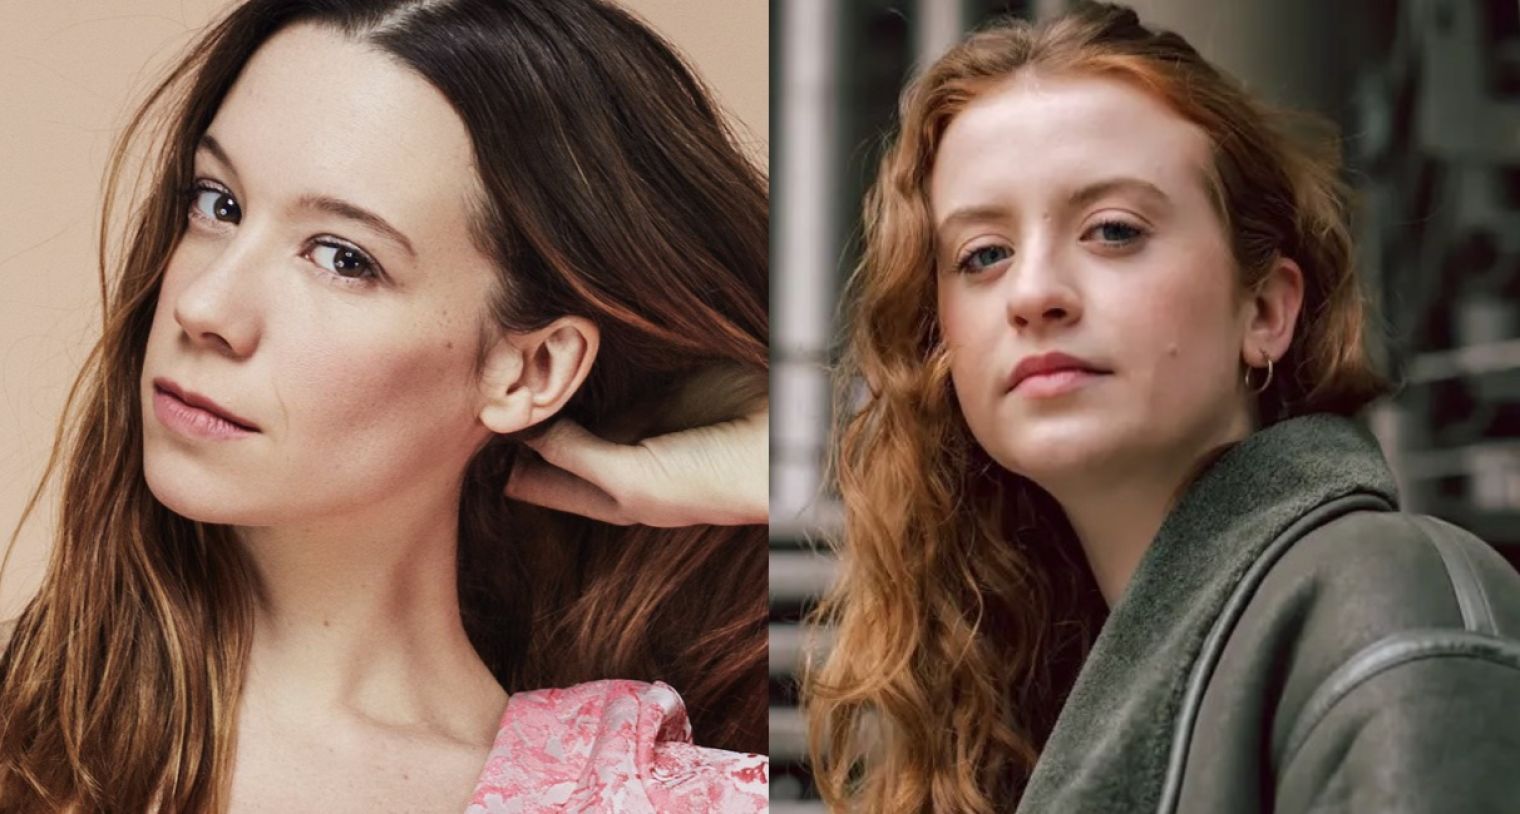 Chloe Pirrie and Máiréad Tyers both have films premiering at the acclaimed SXSW Film Festival this weekend